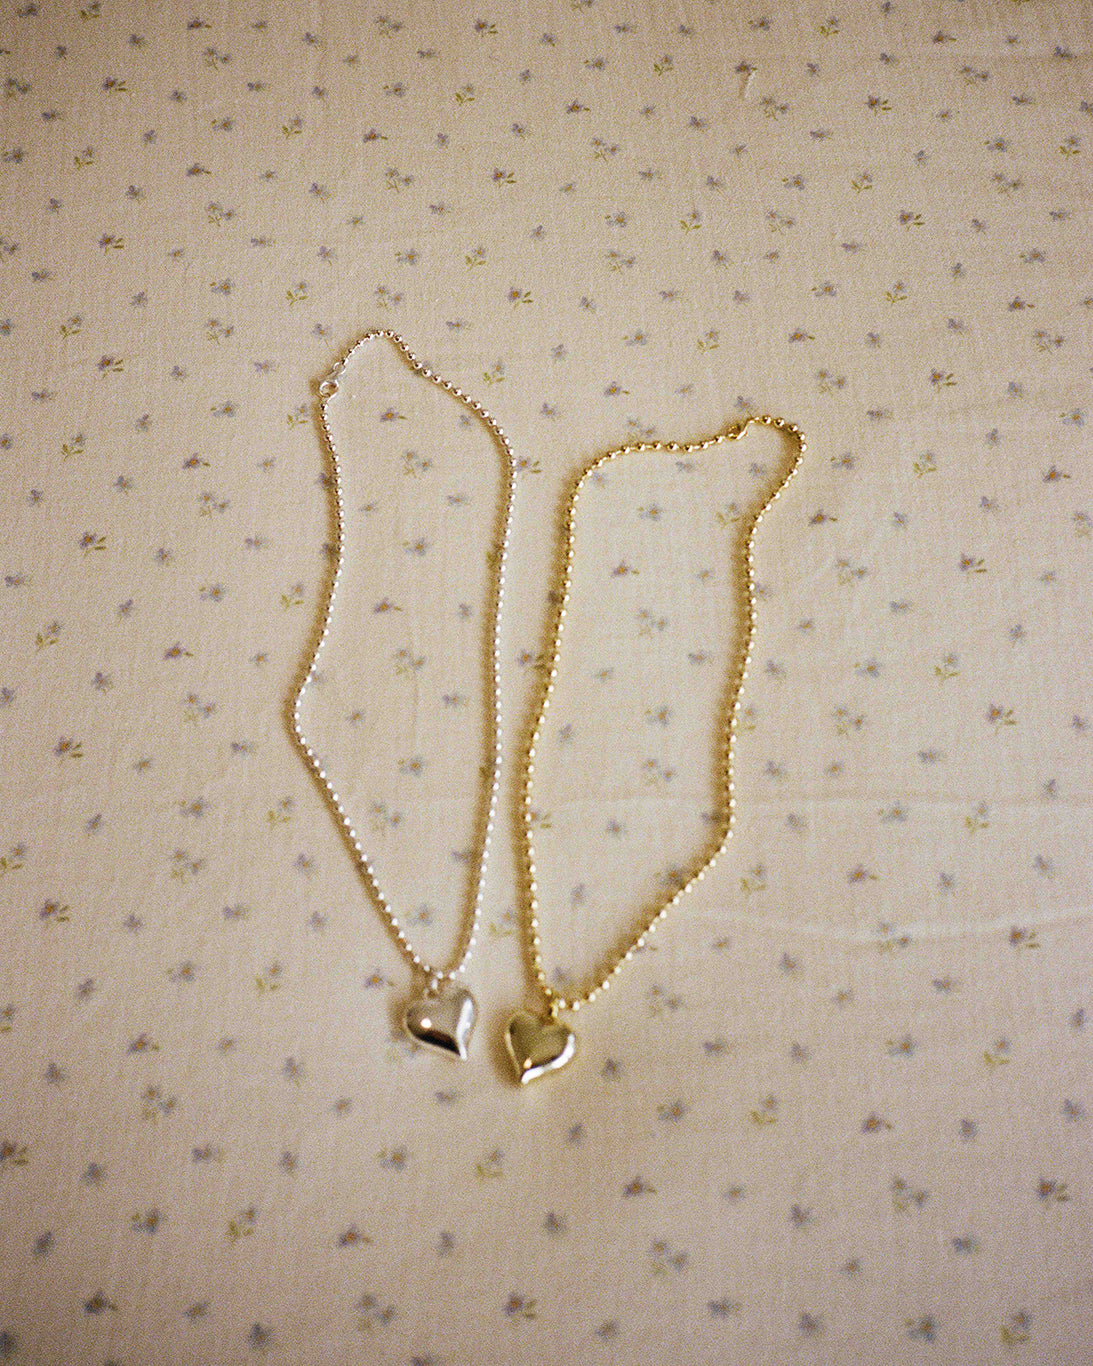 Metal Heart Necklace - Gold